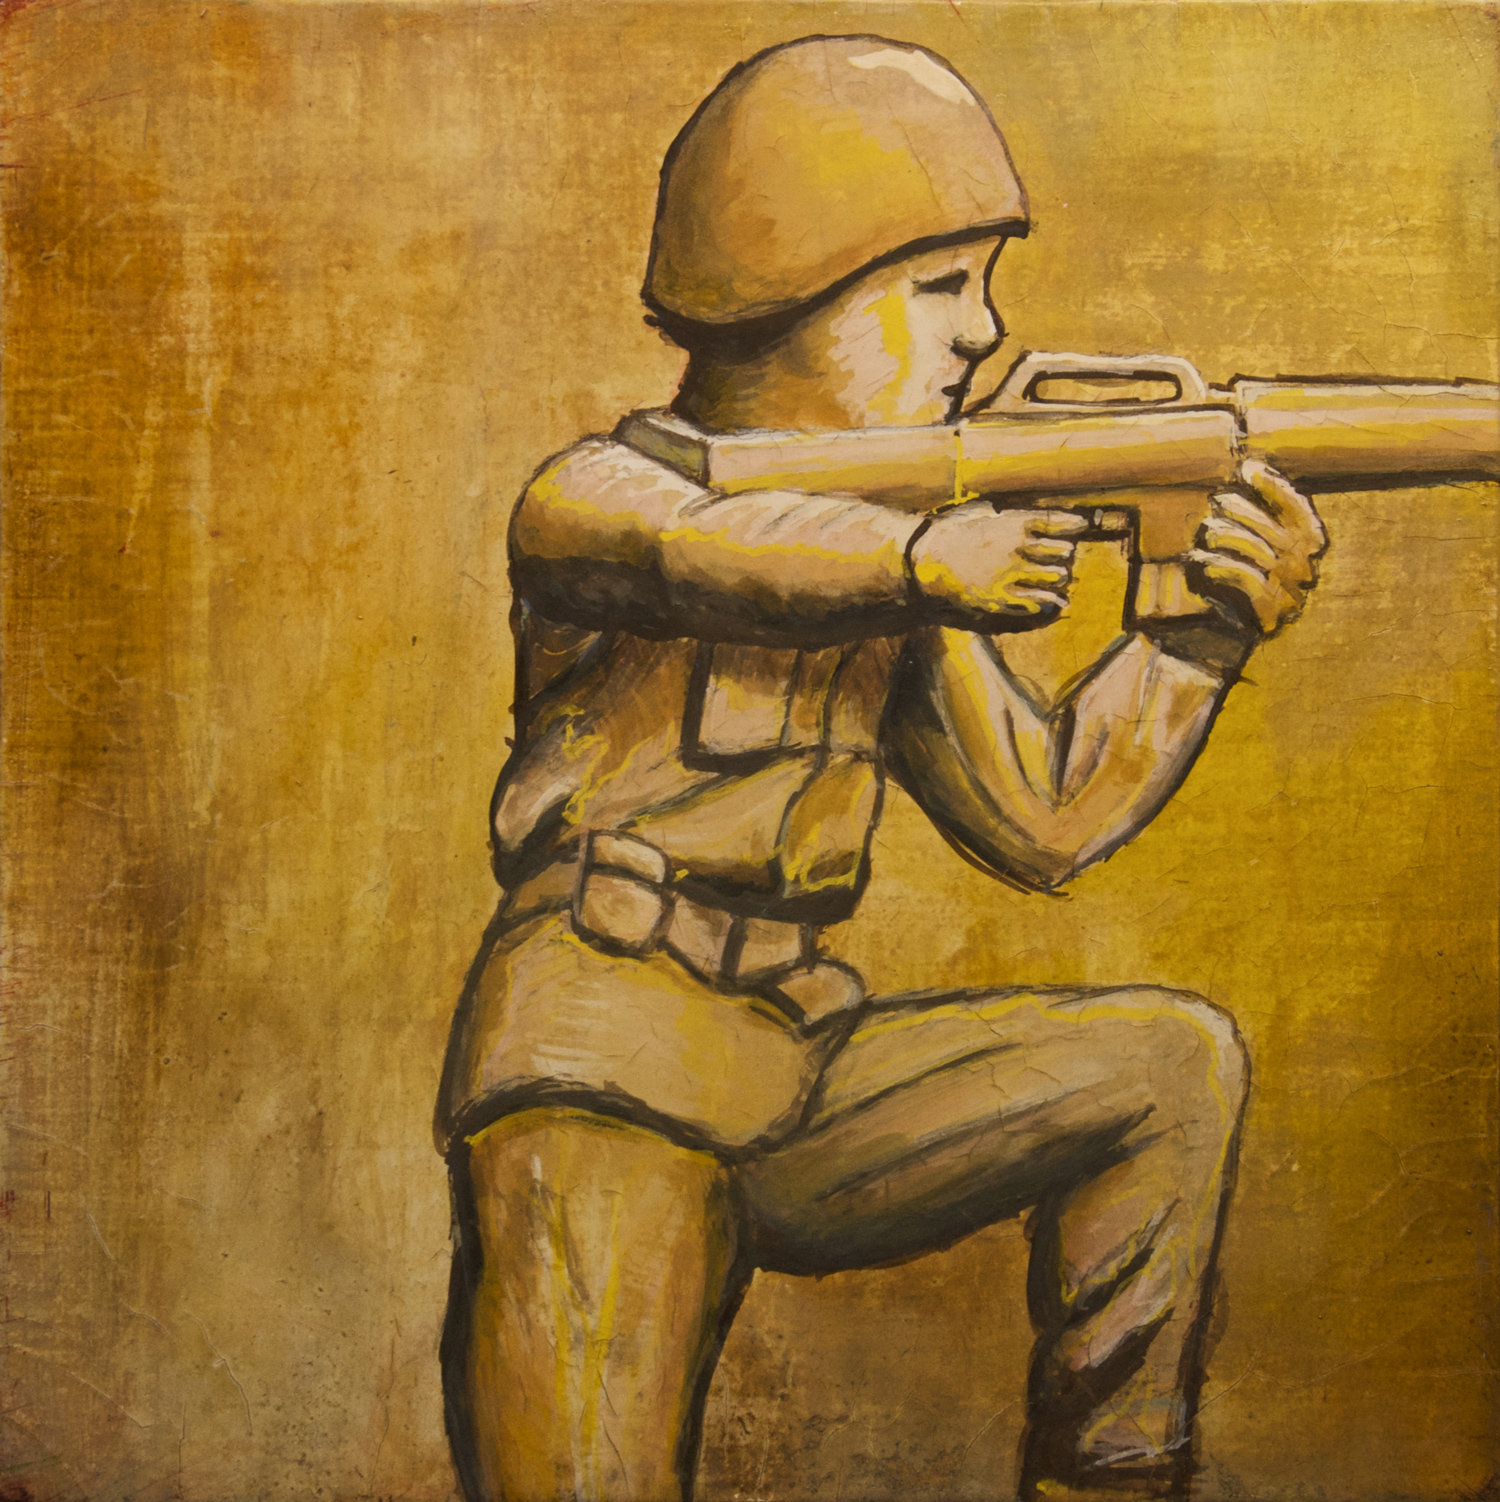 Plastic Soldier gouche painting, by Billy Reiter